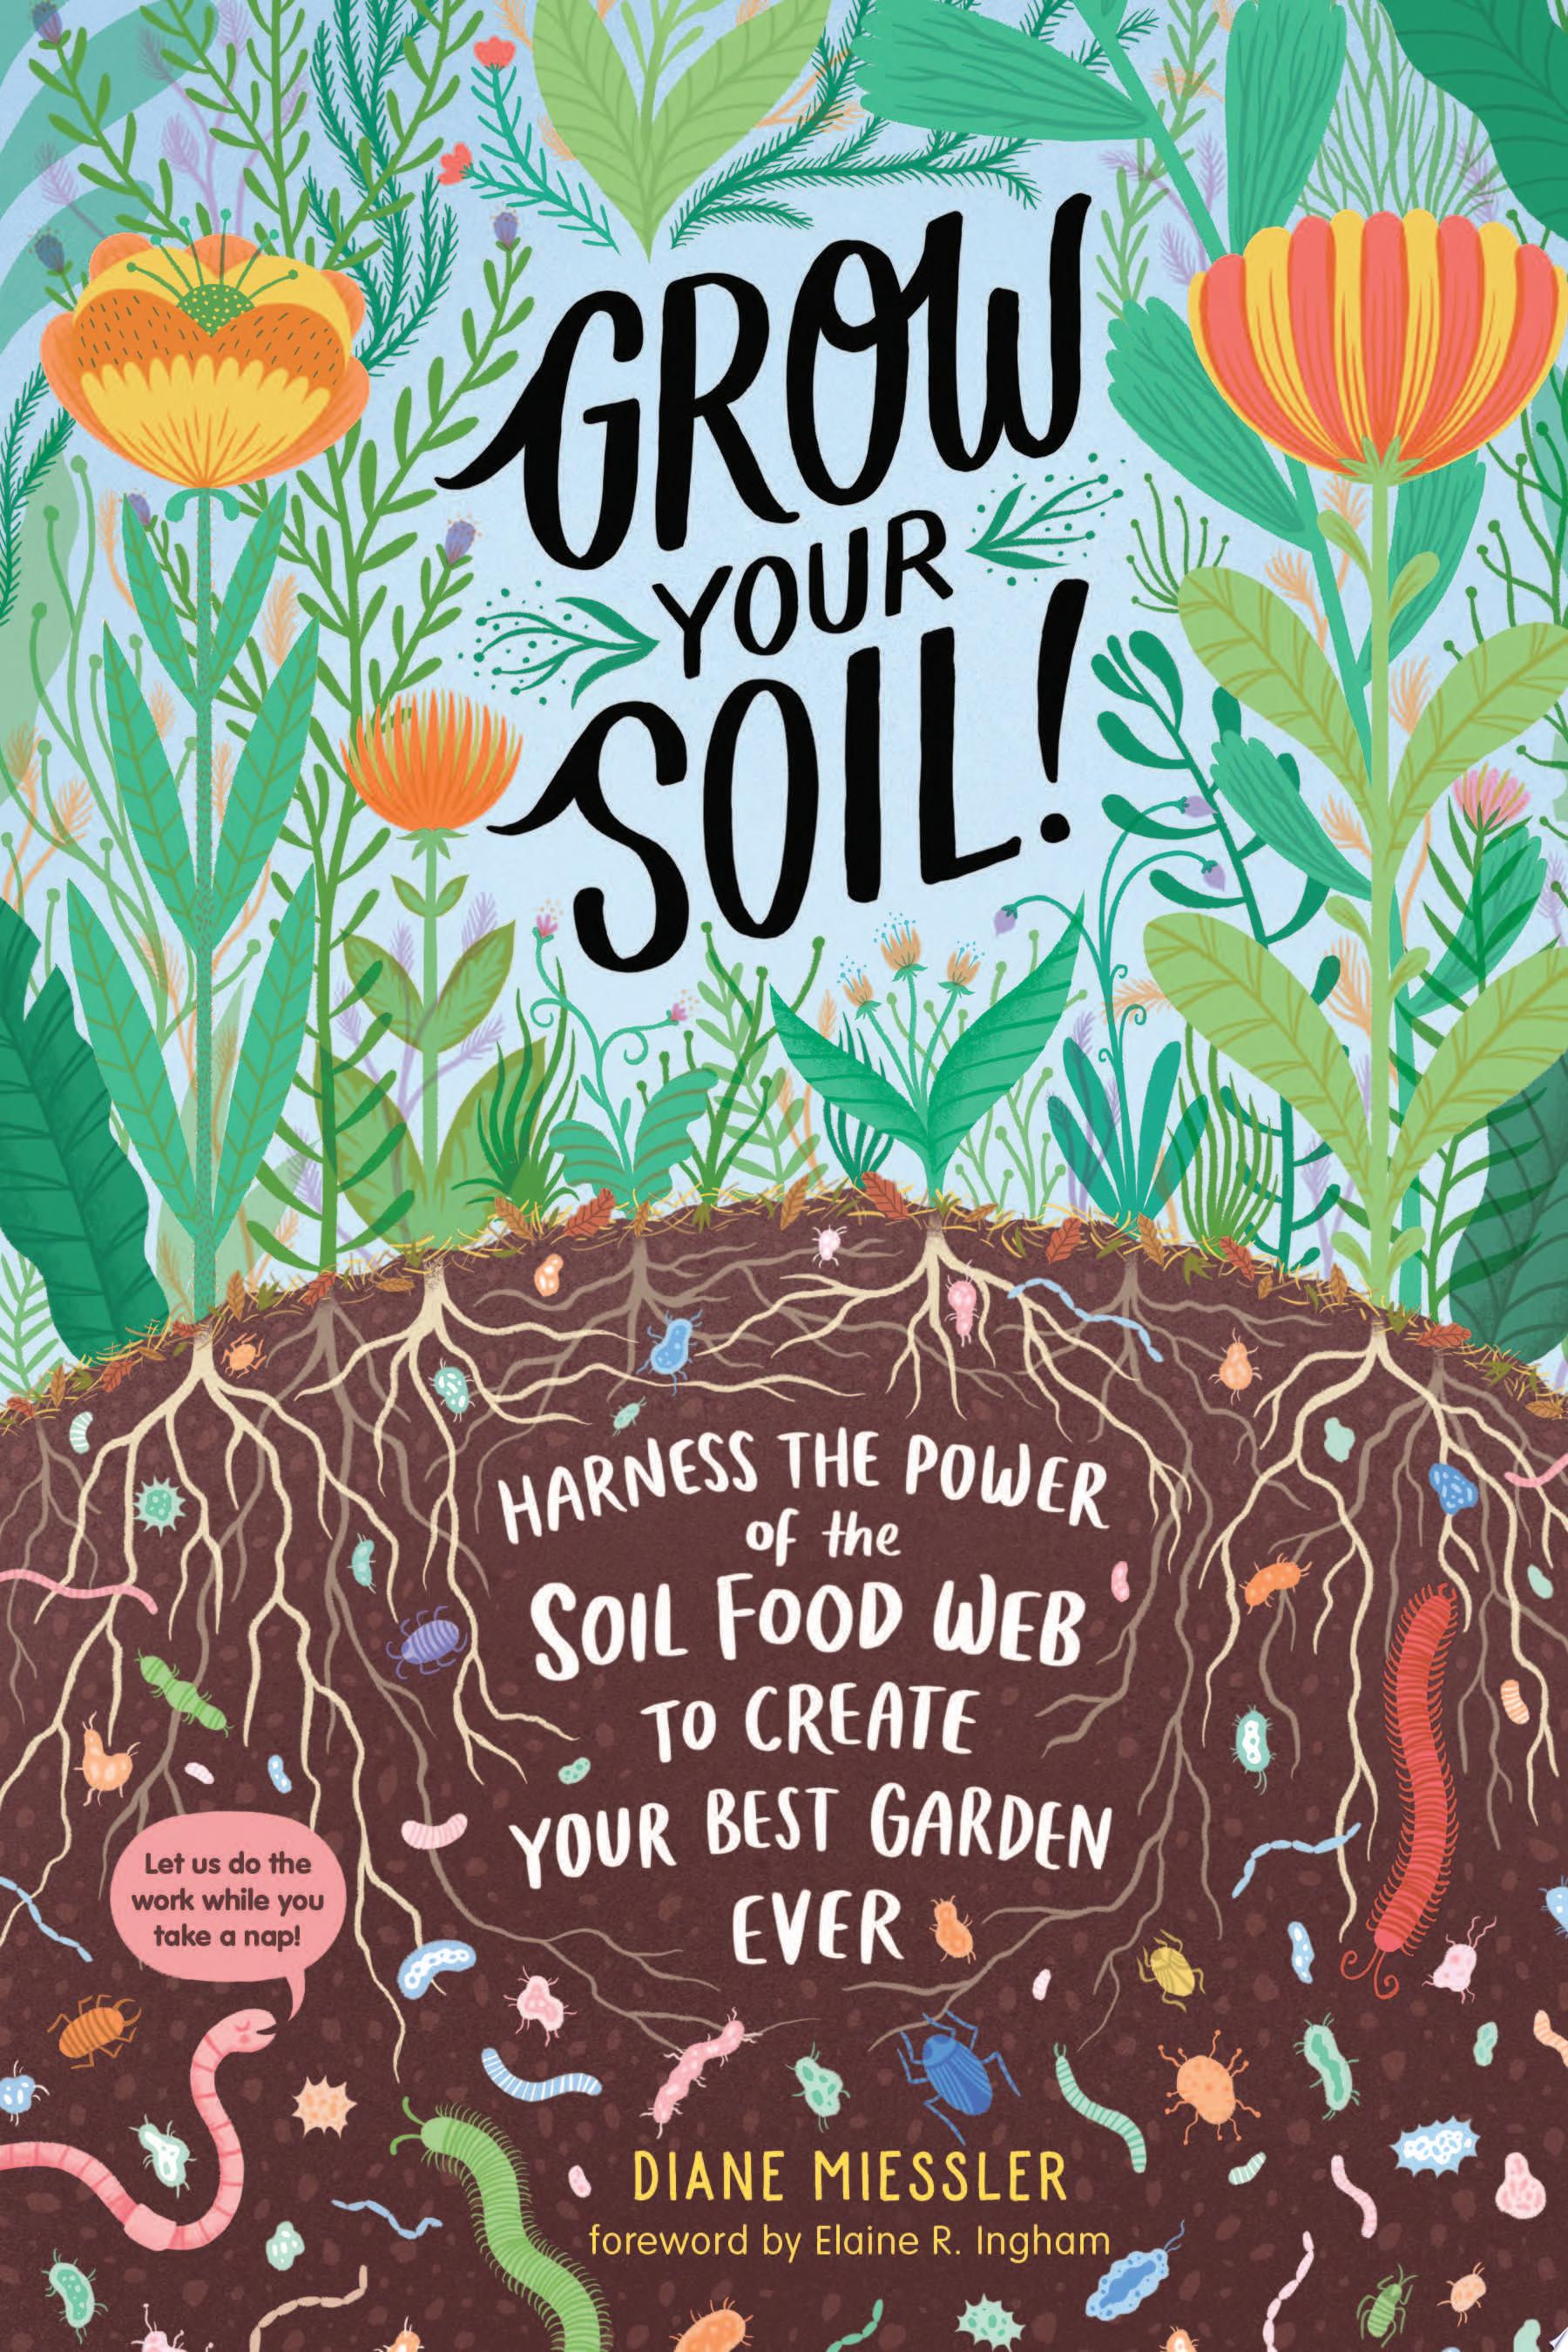 Image for "Grow Your Soil!"